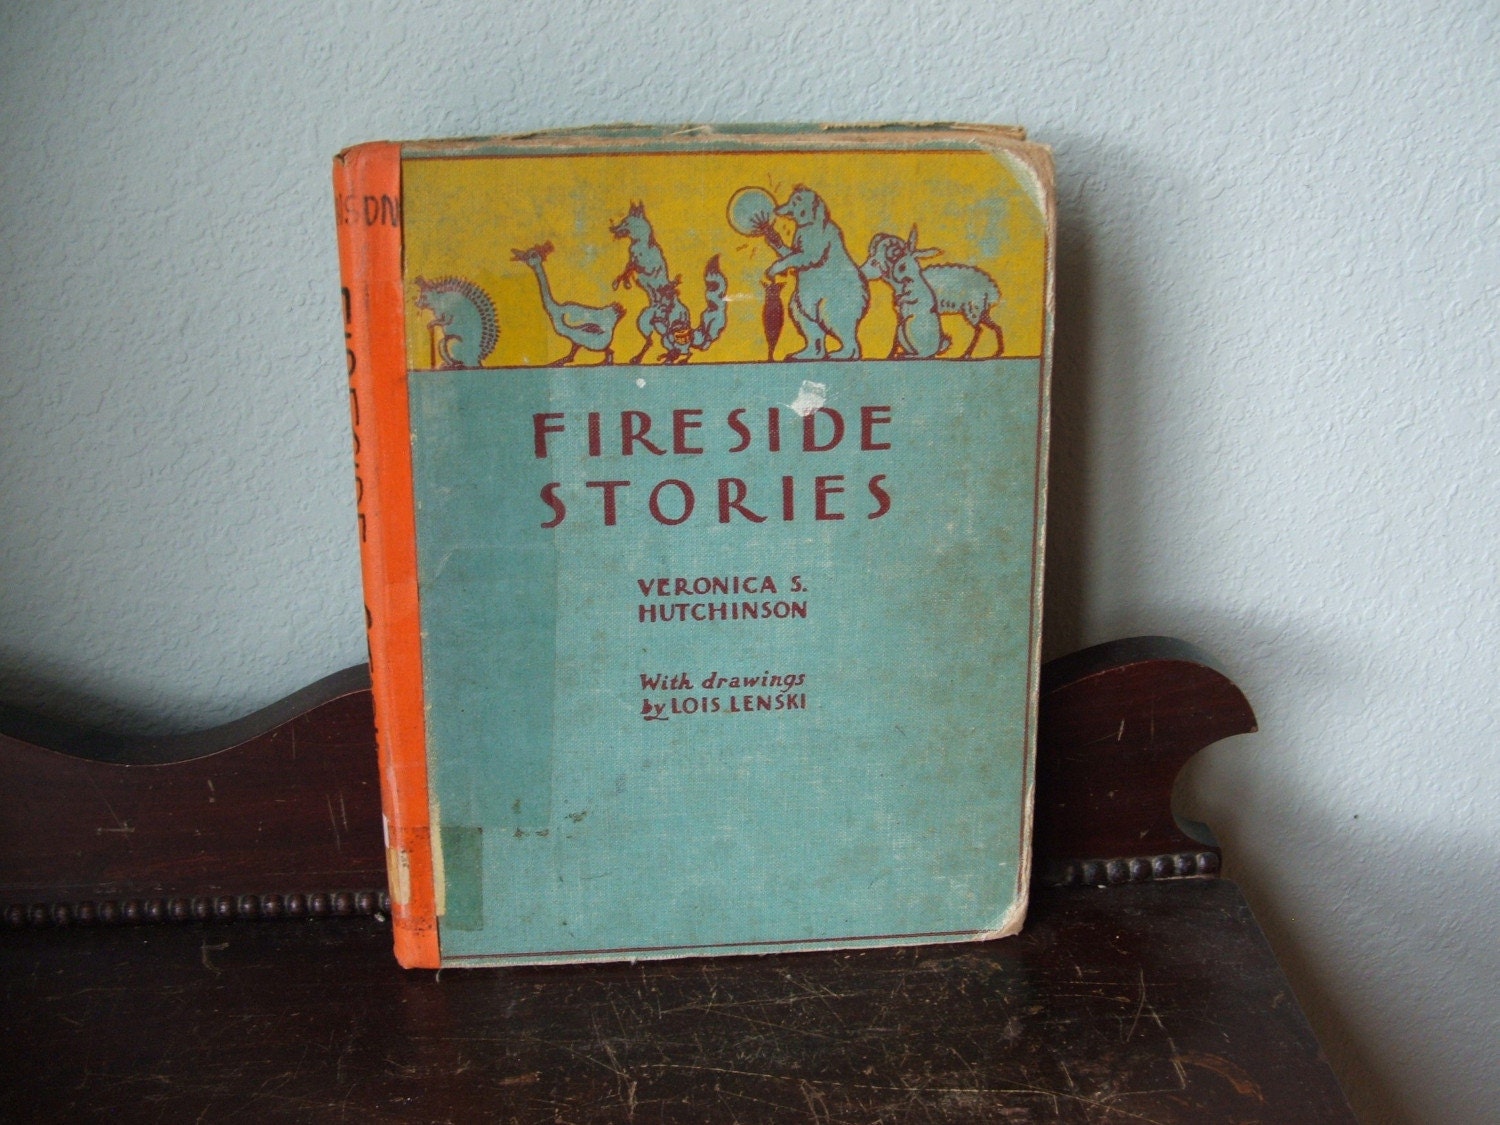 Fireside Stories by Veronica s Hutchinson with drawings by Lois Lenski